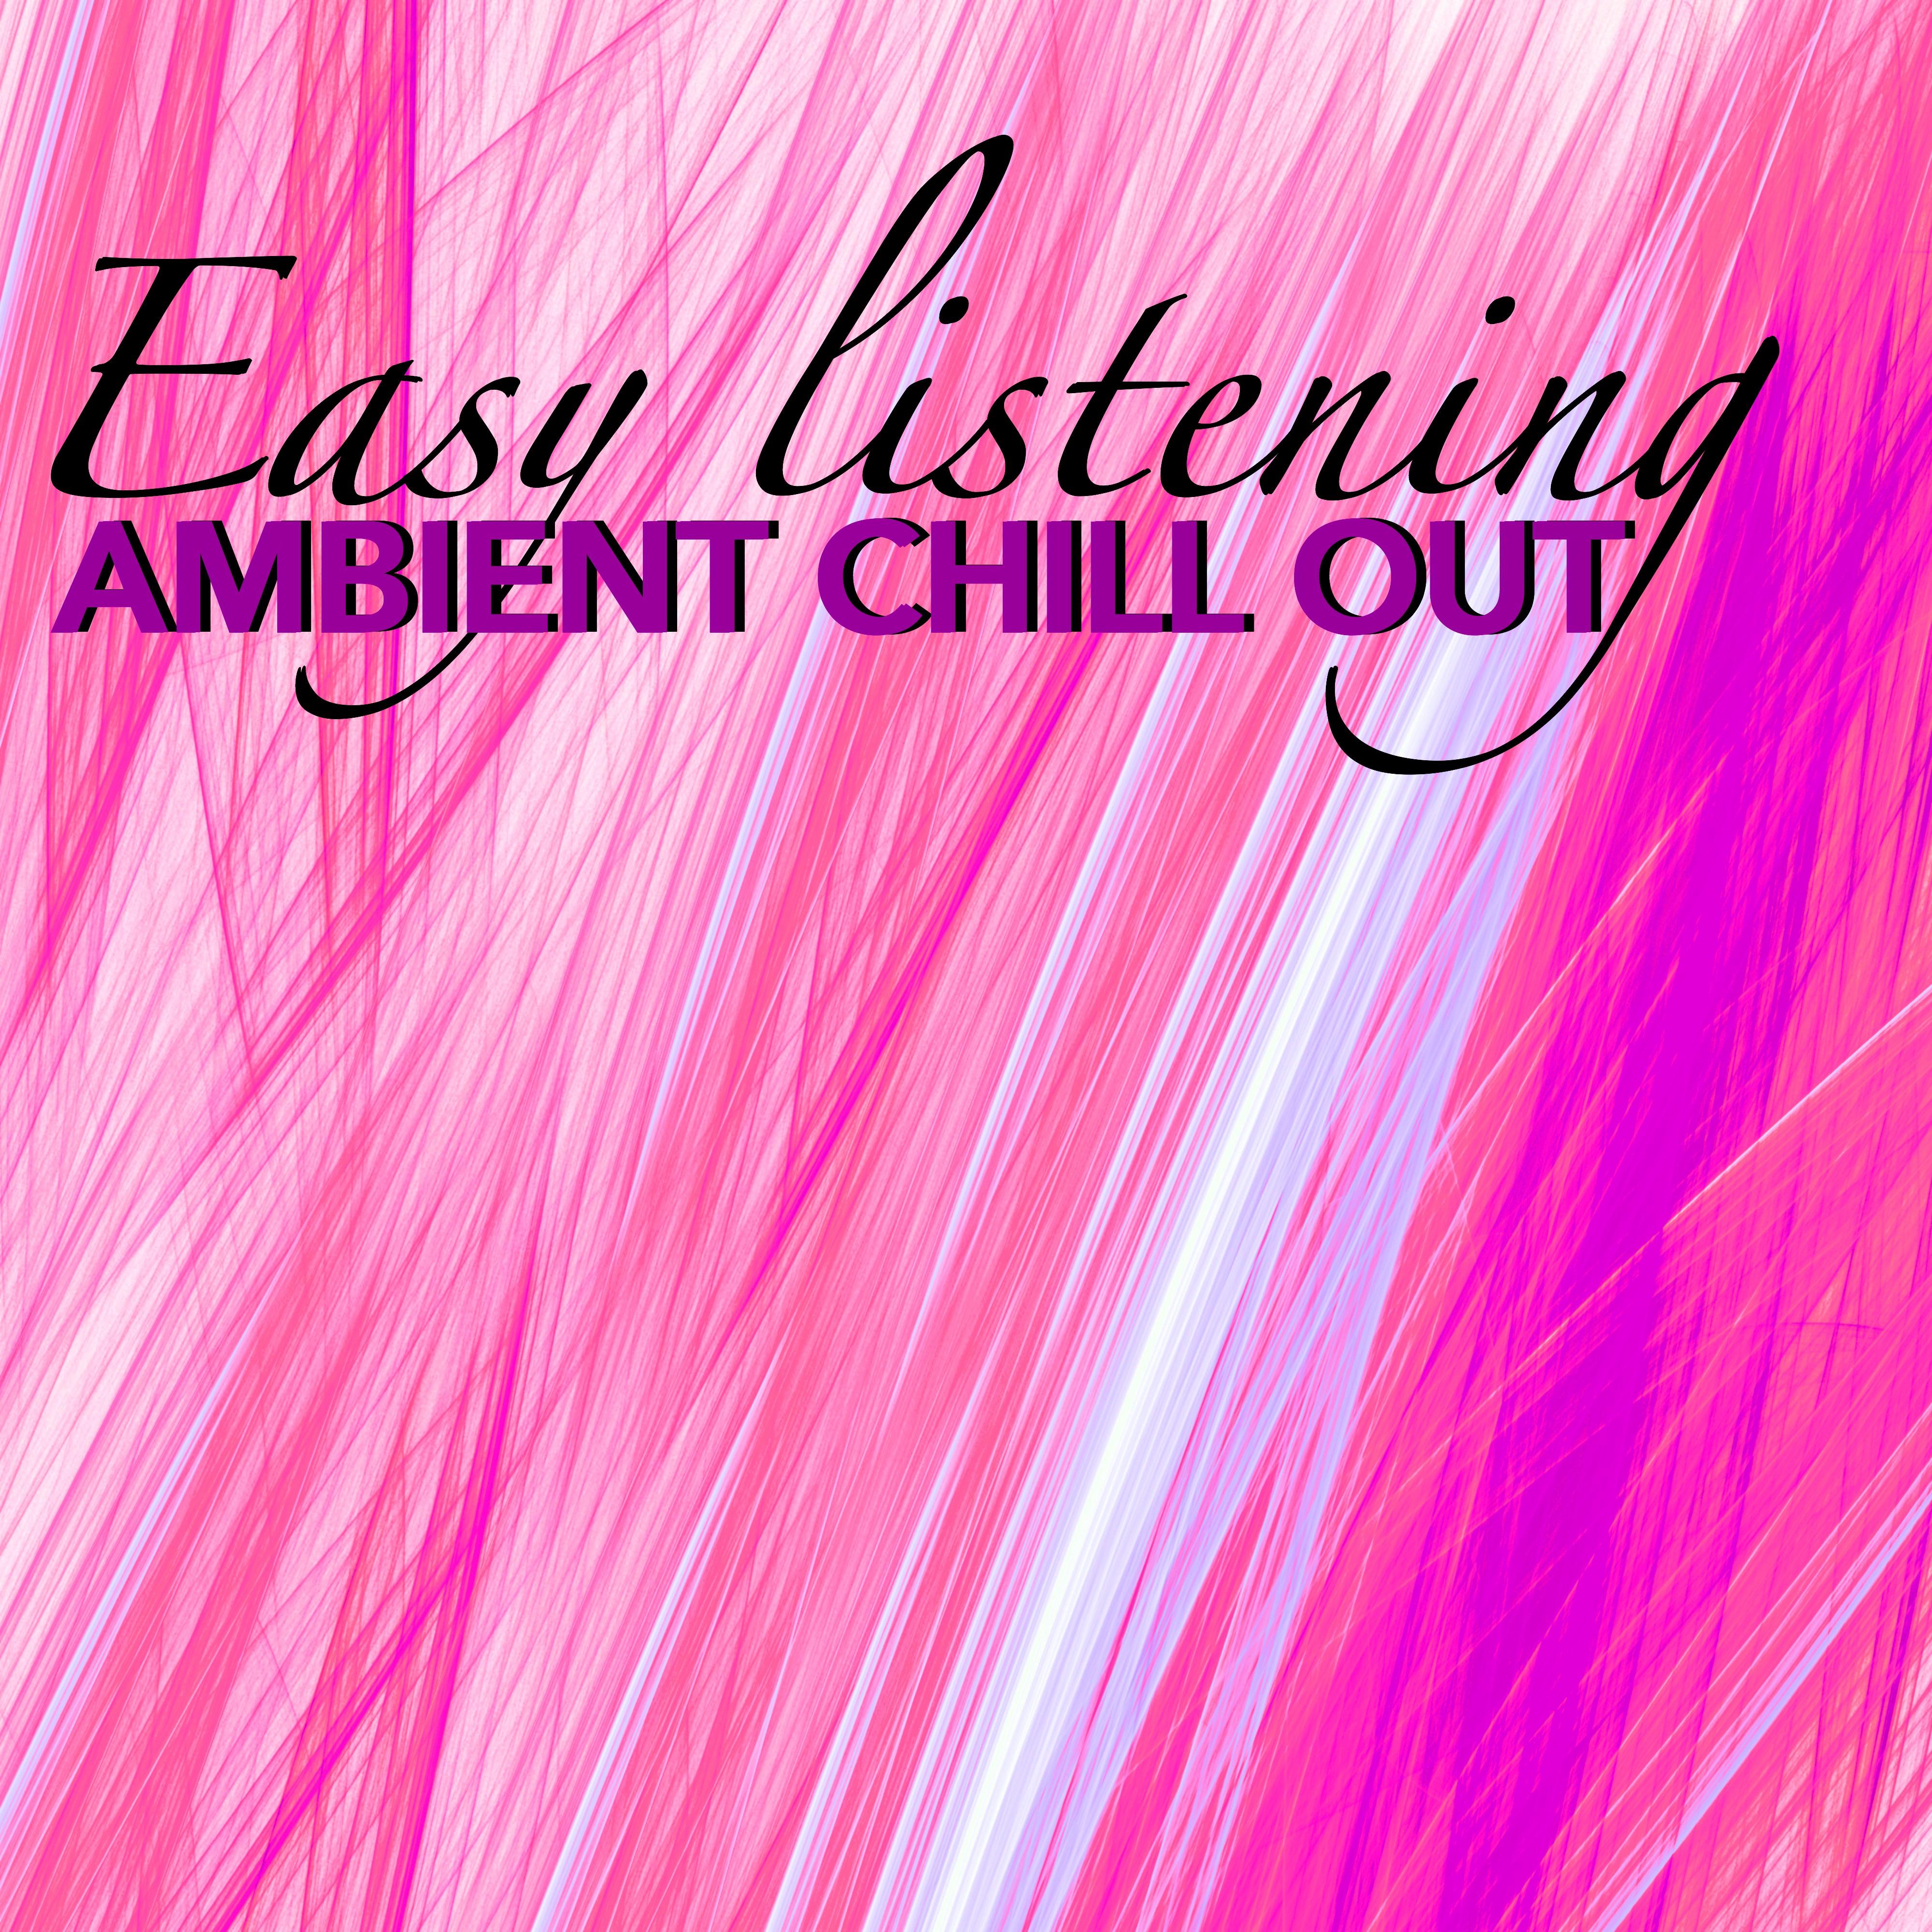 Easy Listening Ambient Chill Out - Waiting Room & Elevator Music for Ambient Relaxation